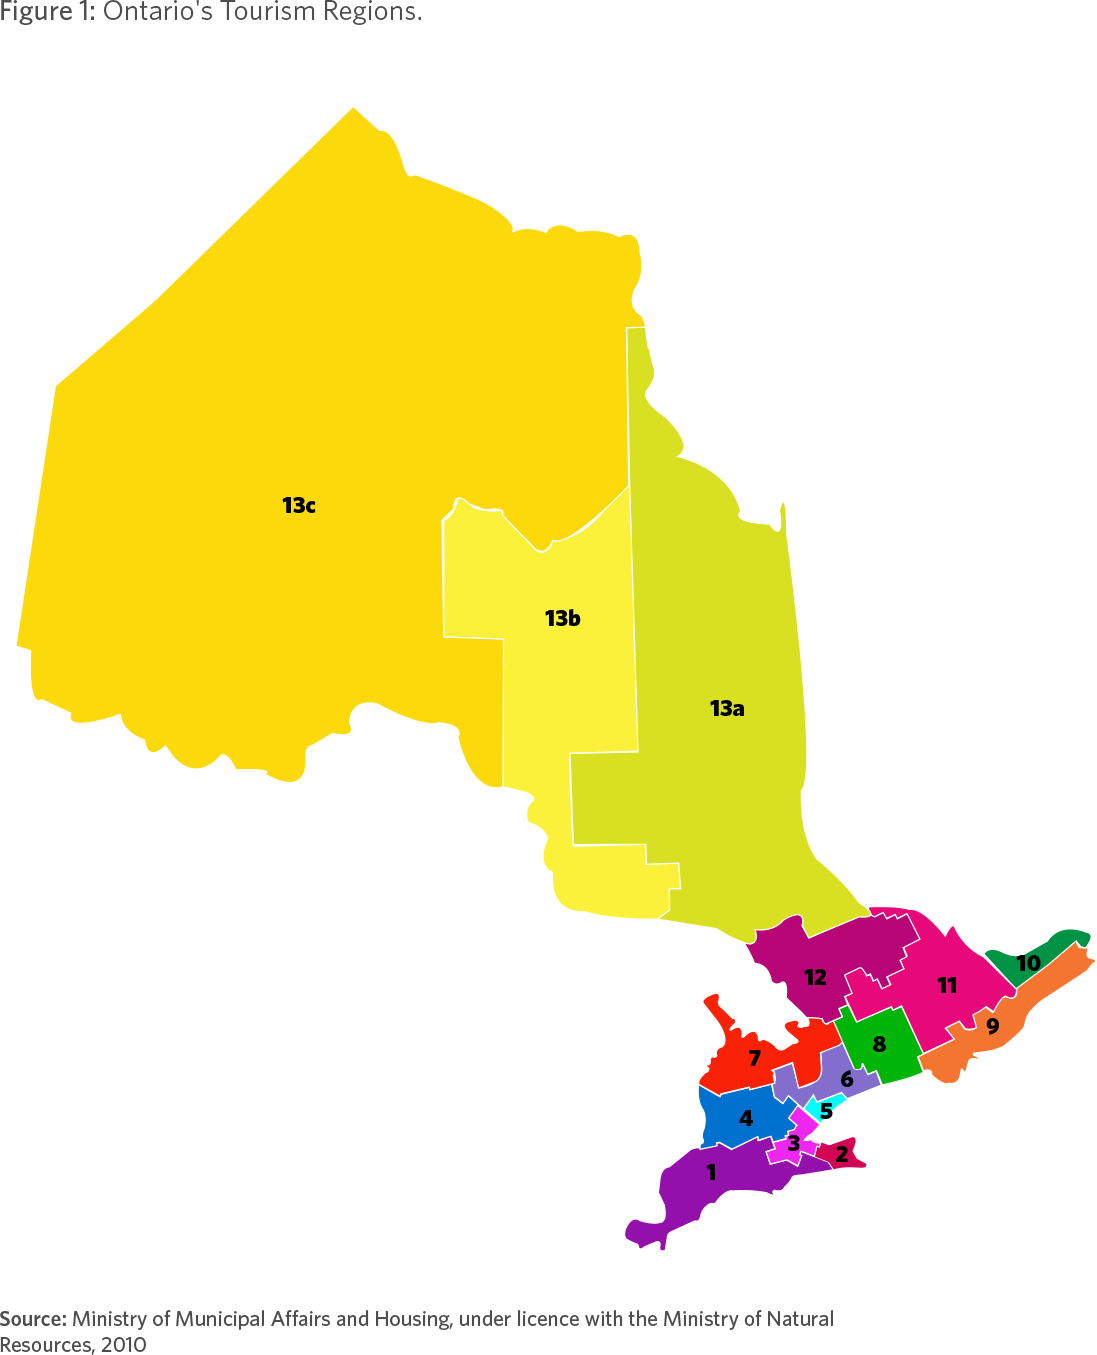 Figure 1: Ontario's Tourism Regions. Source: Ministry of Municipal Affairs and Housing, under licence with the Ministry of Natural Resources, 2010